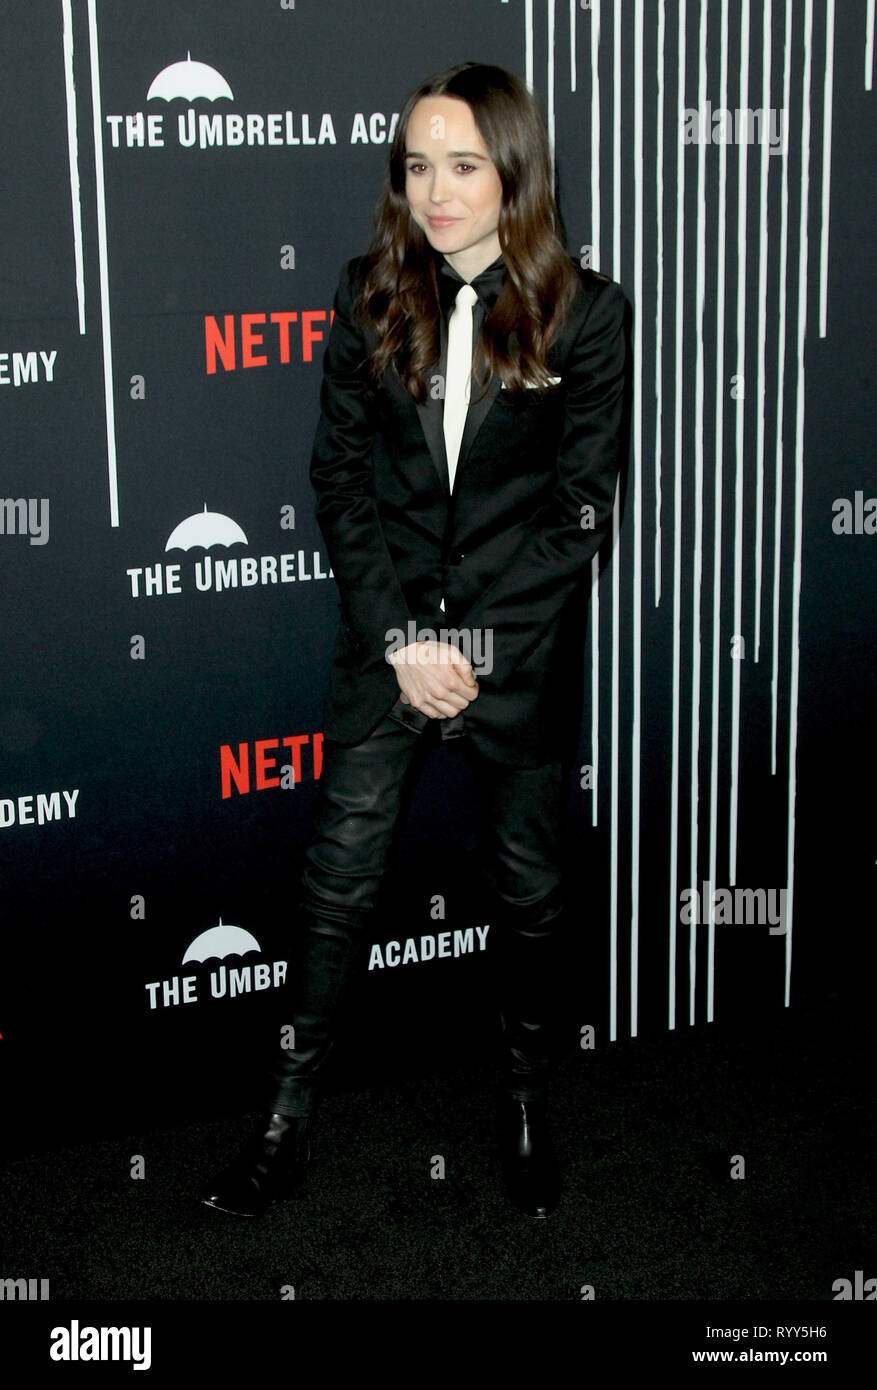 Premiere of Netflix's 'The Umbrella Academy' season 1 held at the ArcLight  Hollywood - Arrivals Featuring: Ellen Page Where: Los Angeles, California,  United States When: 12 Feb 2019 Credit: Adriana M. Barraza/WENN.com